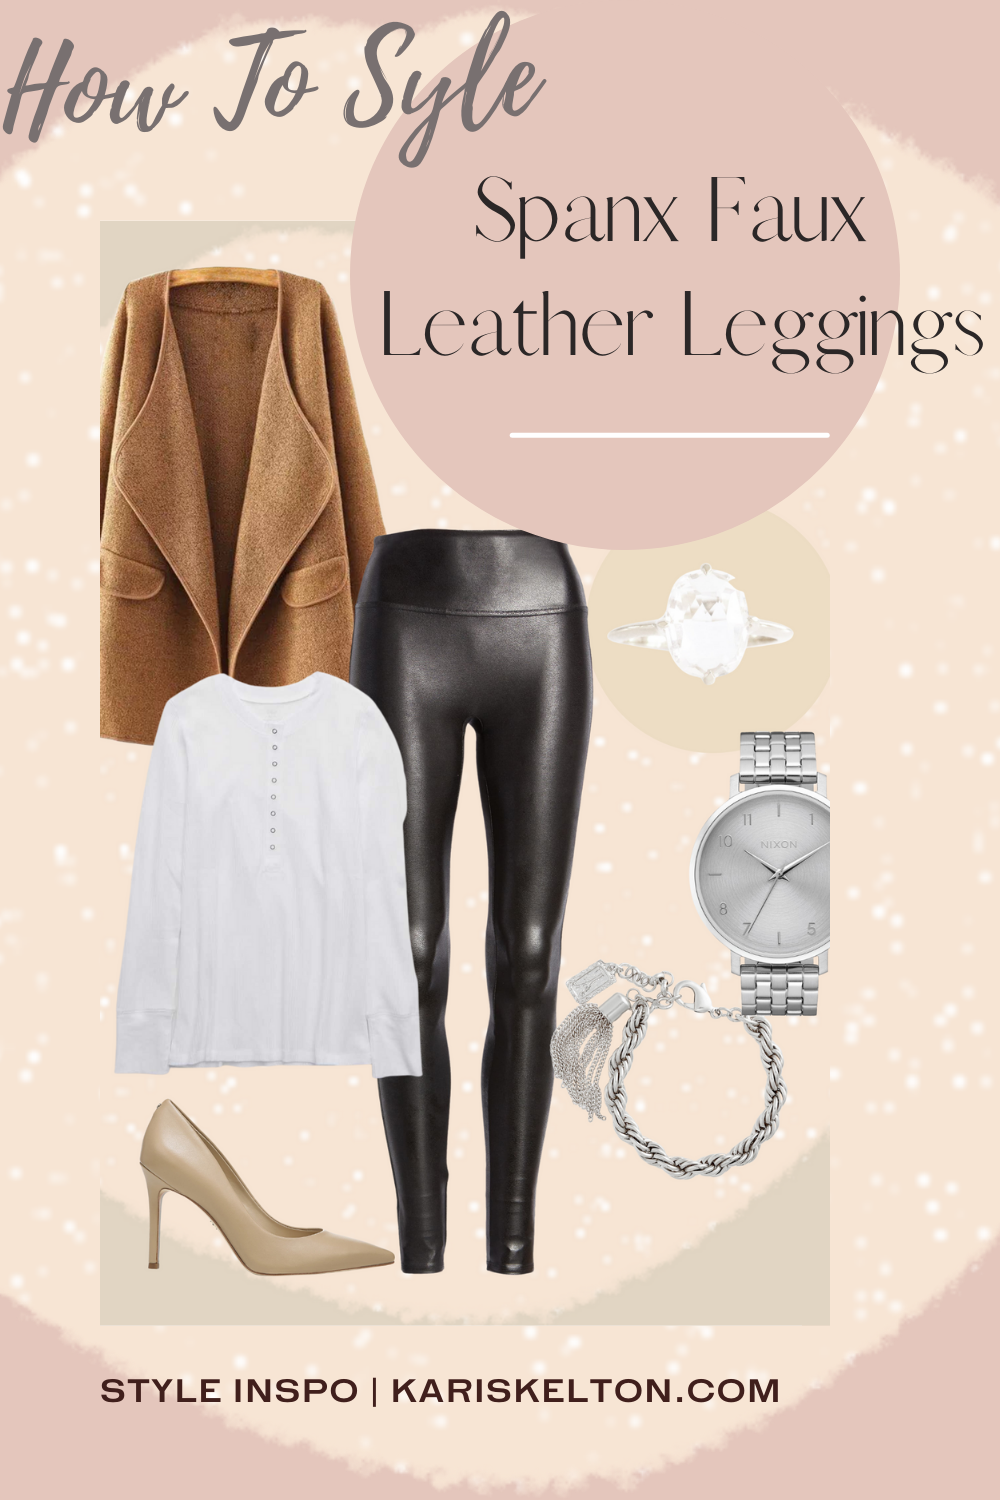 Black Leather Leggings with Black Quilted Jacket Outfits (5 ideas & outfits)